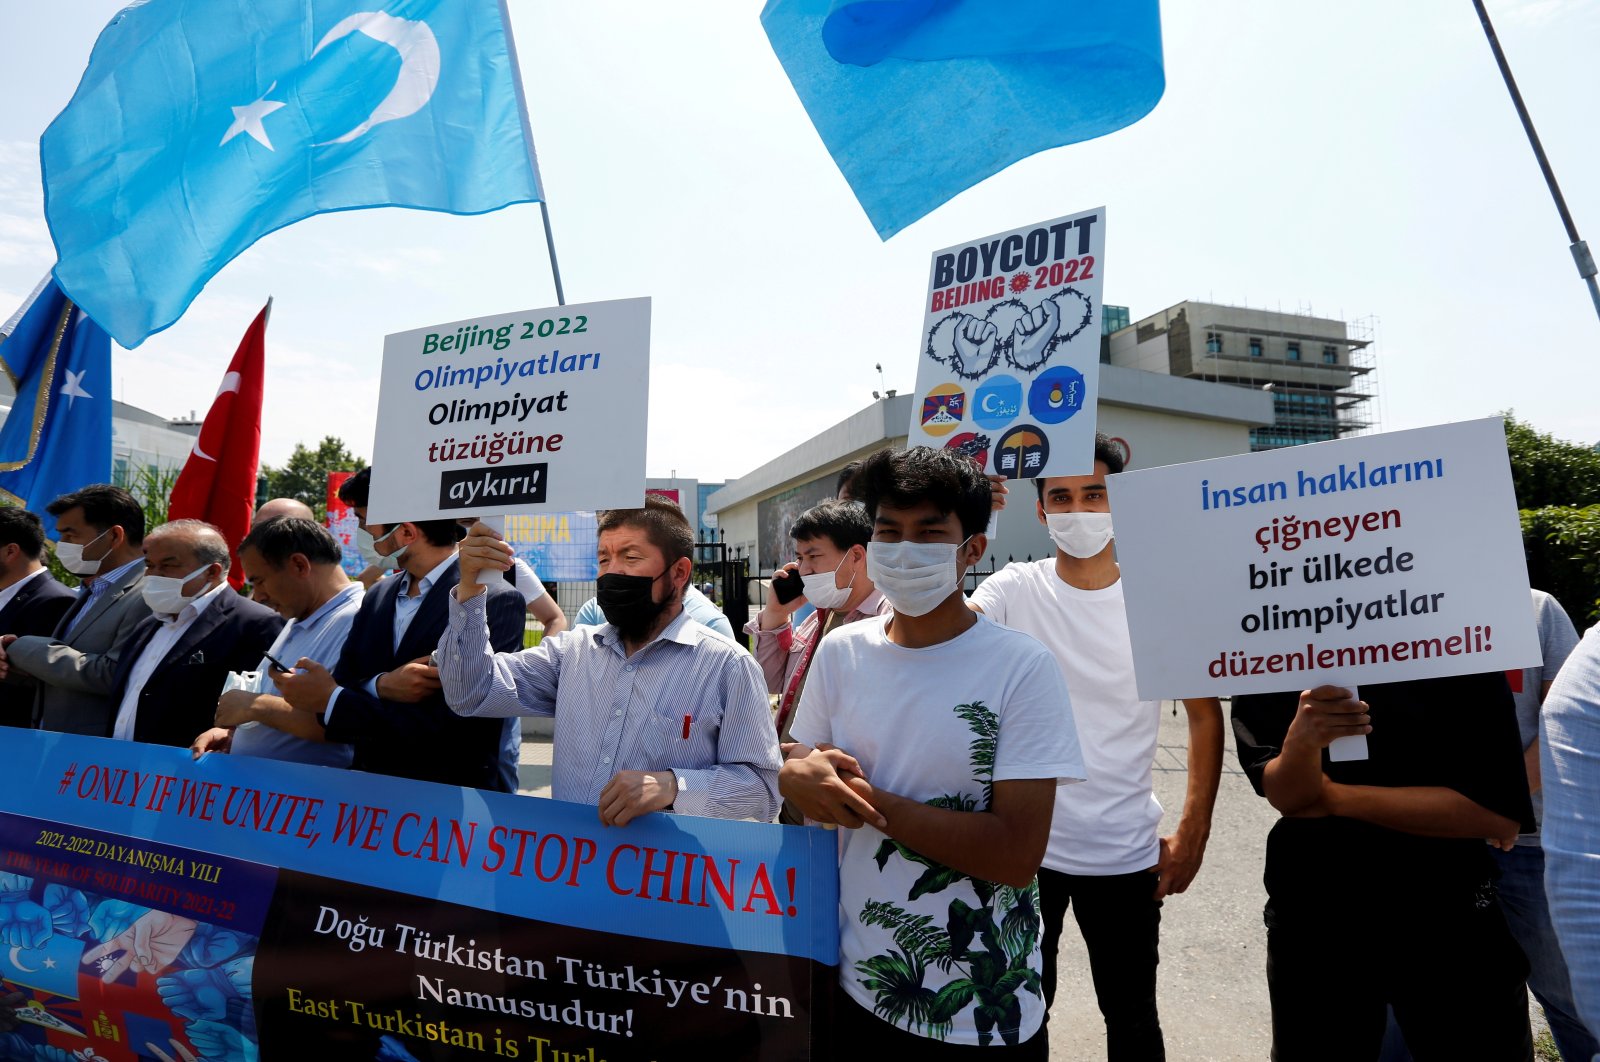 Ethnic Uyghur demonstrators take part in a "No Beijing 2022" protest calling for a boycott of Beijing 2022 Winter Olympic Games, in front of the Olympic House, the headquarters of Turkey&#039;s National Olympic Committee (TMOK), in Istanbul, Turkey June 23, 2021. (Reuters Photo)